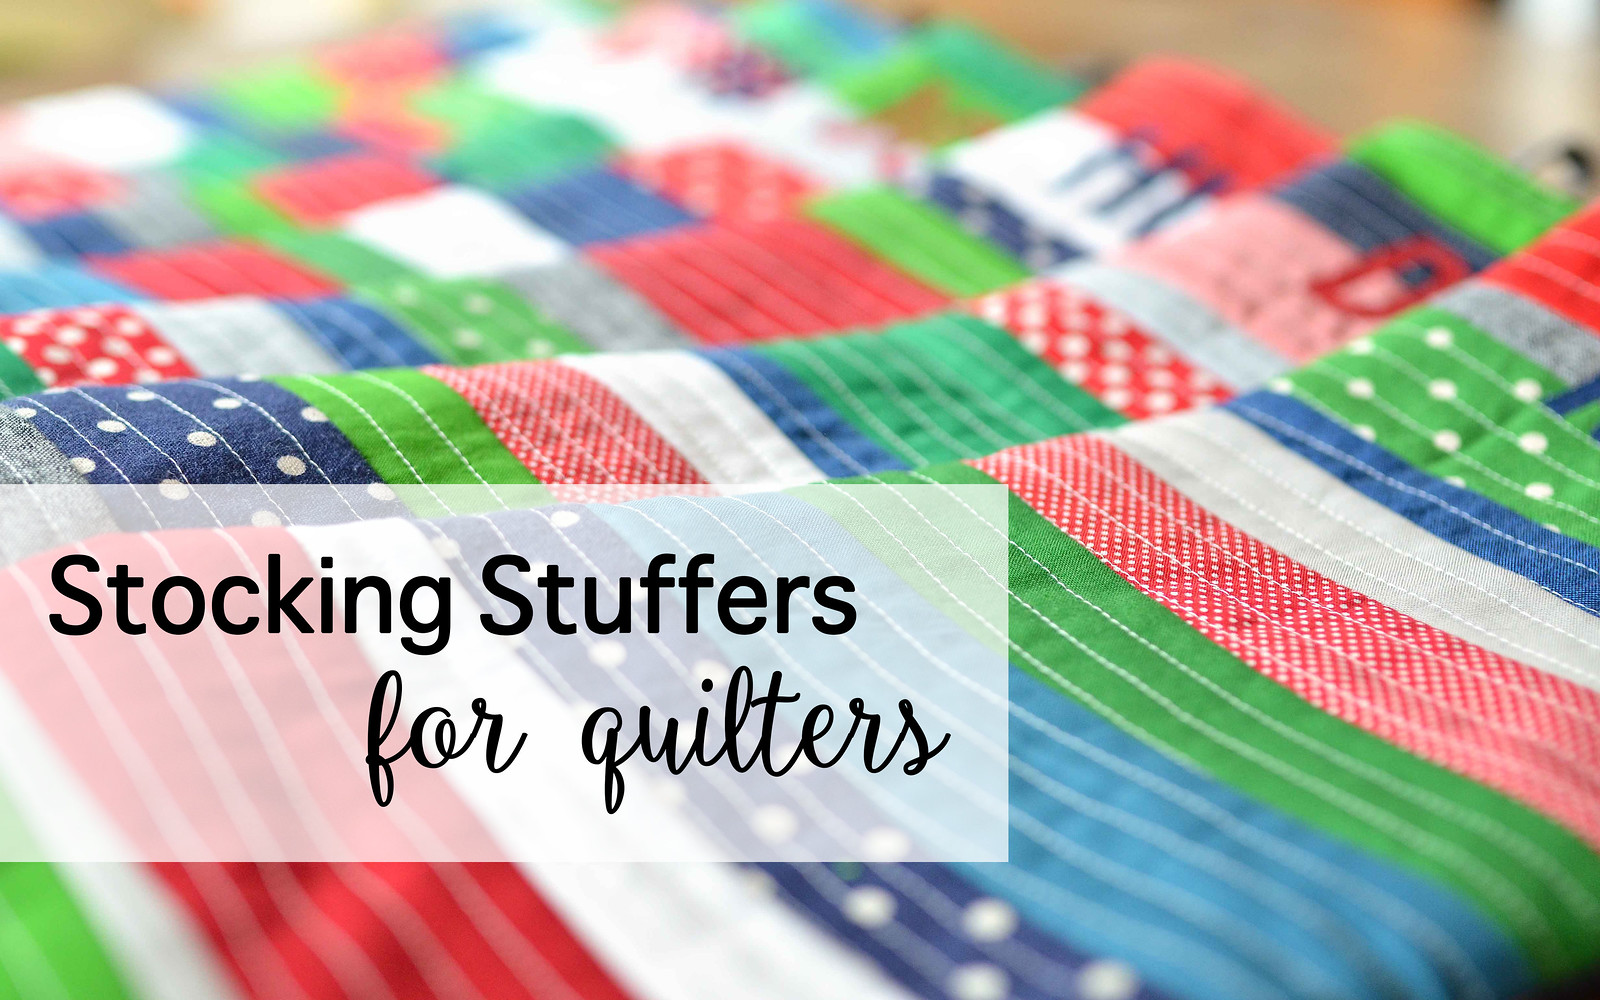 Stocking Stuffers for Quilters